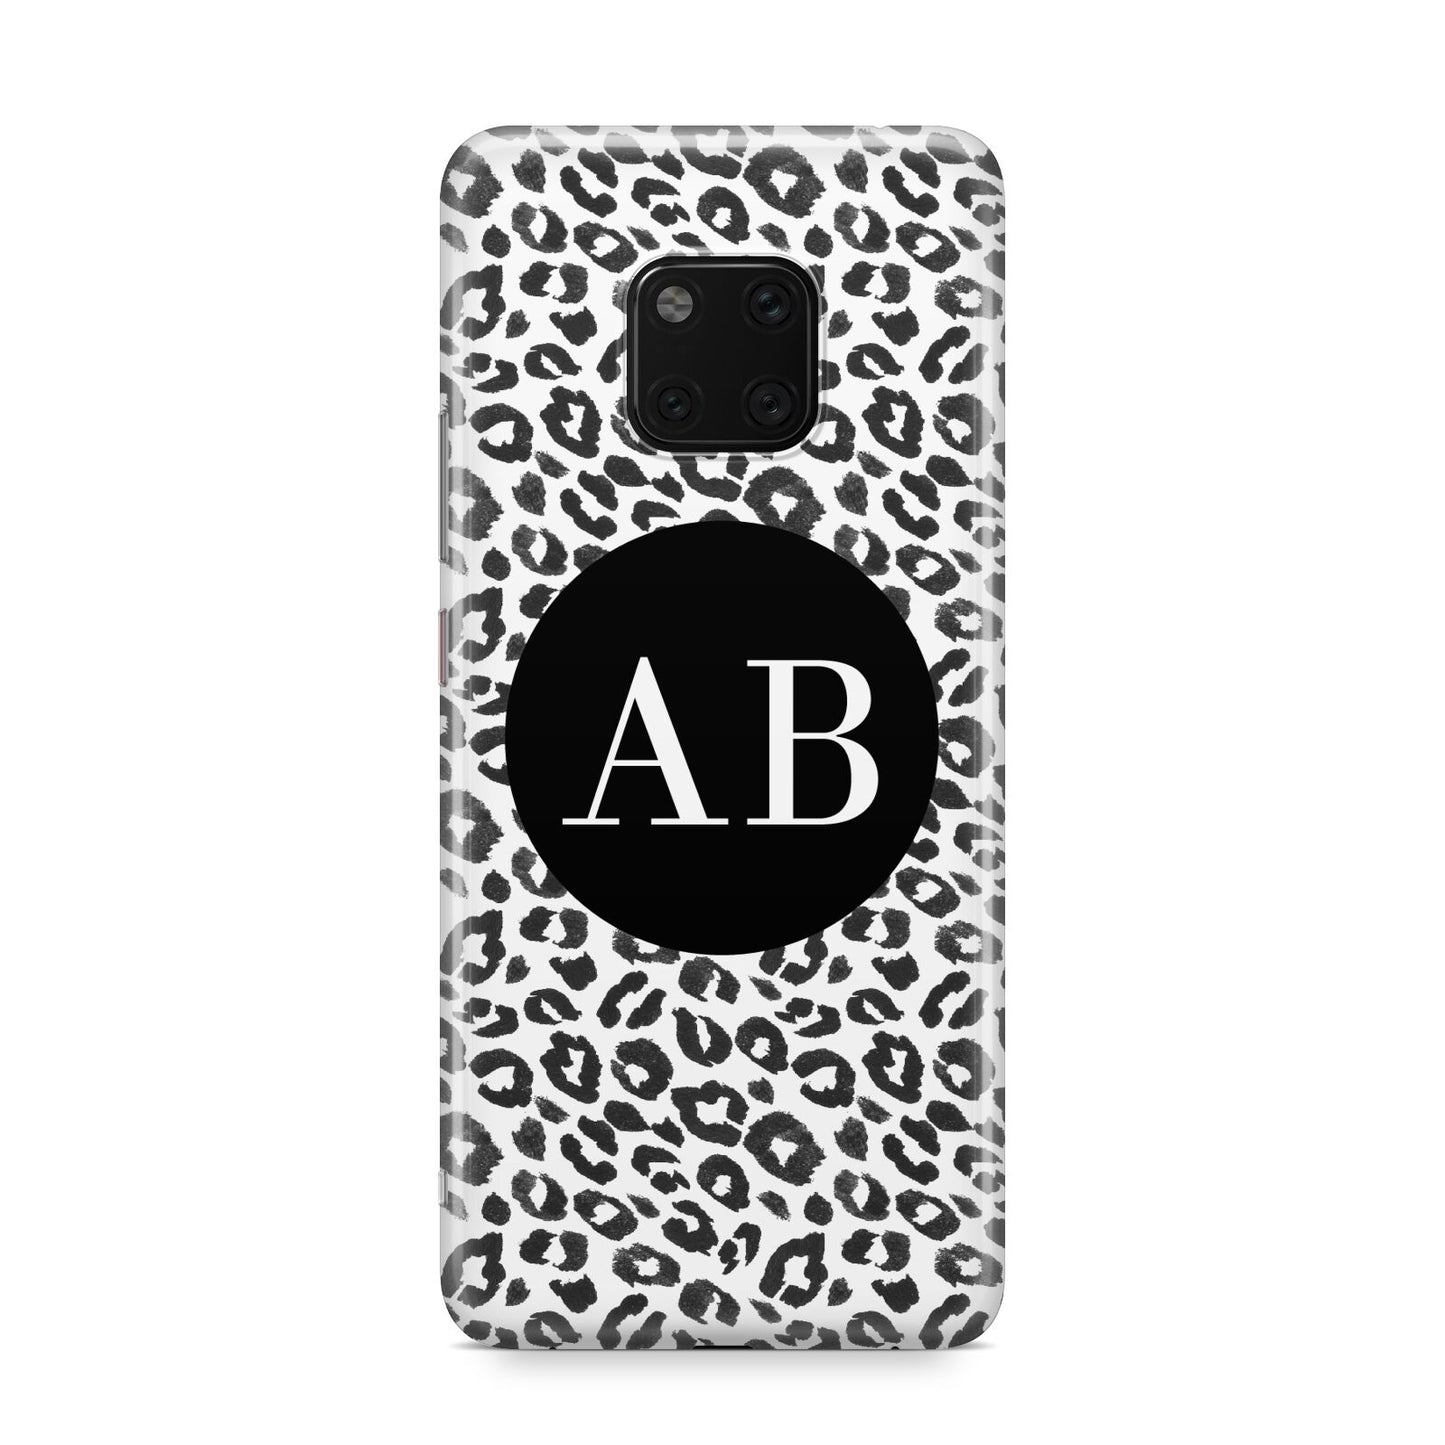 Leopard Print Black and White Huawei Mate 20 Pro Phone Case